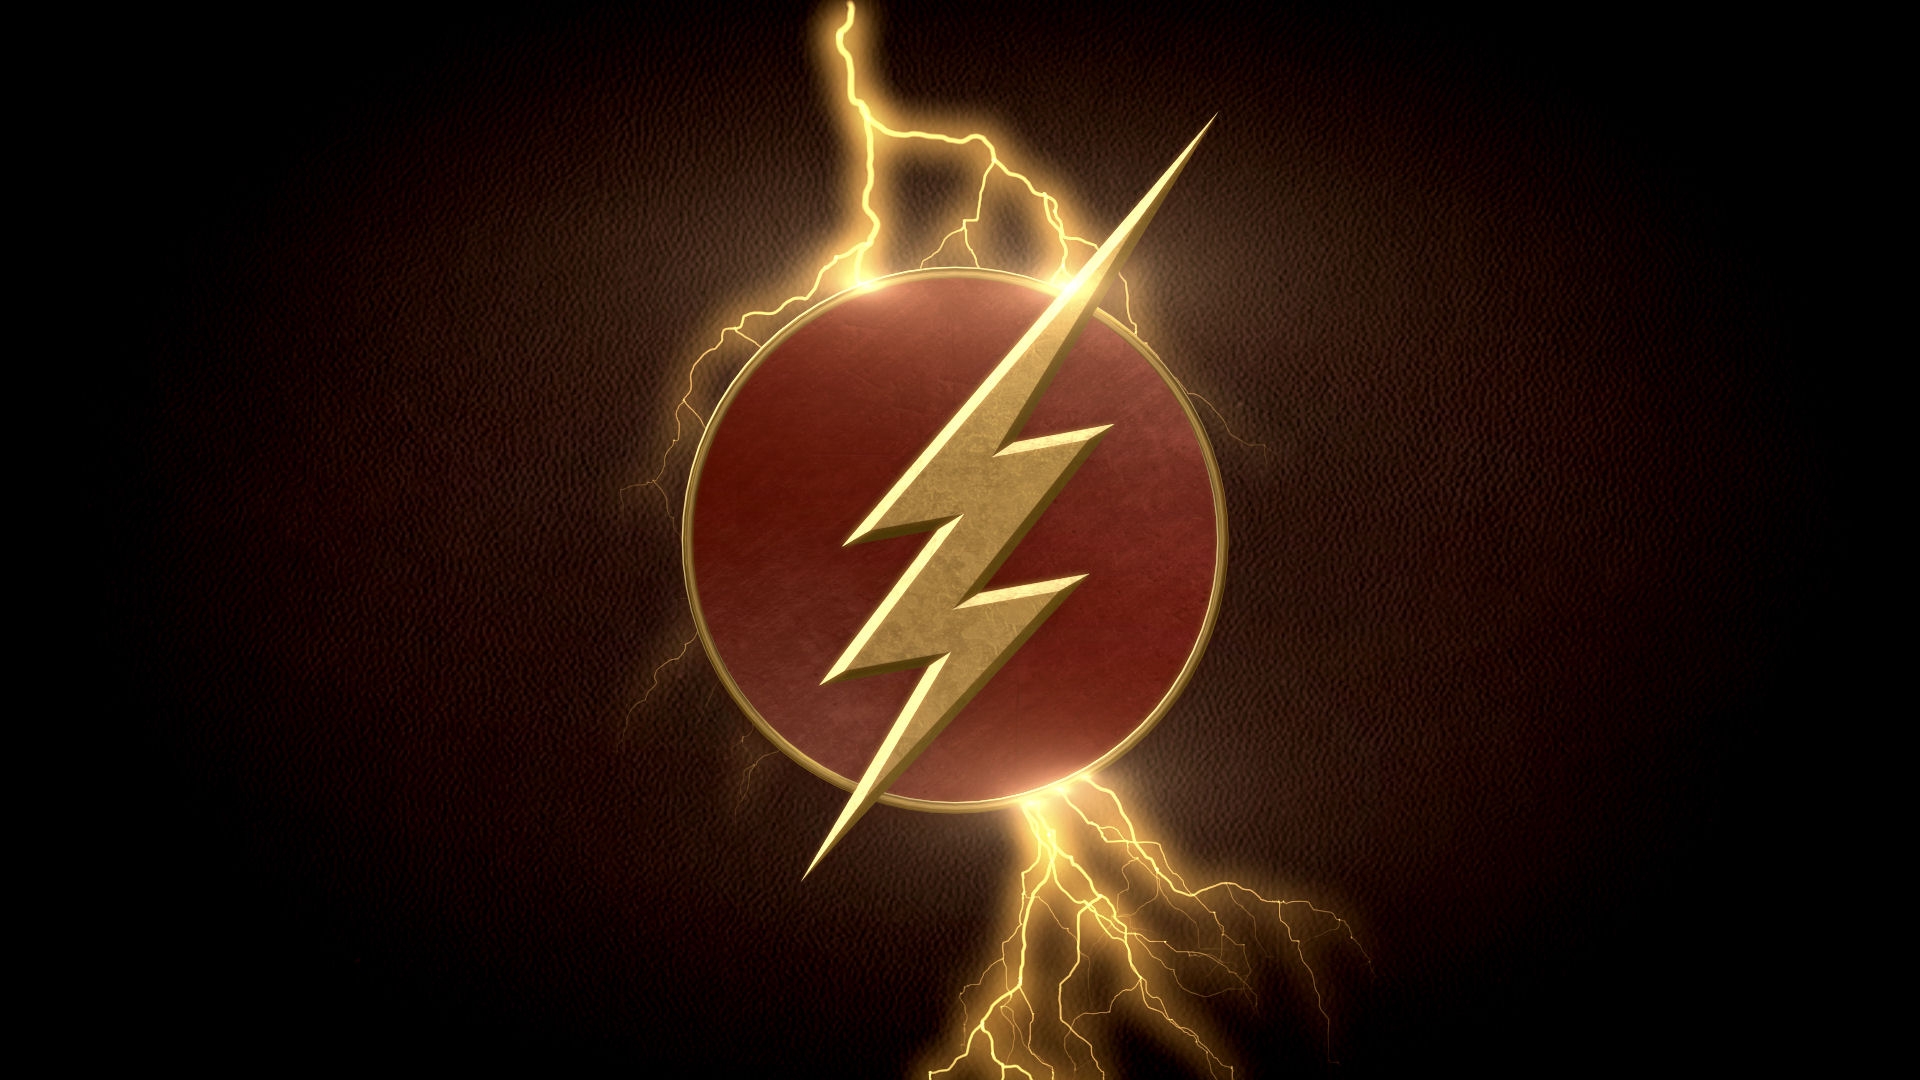 Cw Flash Wallpapers